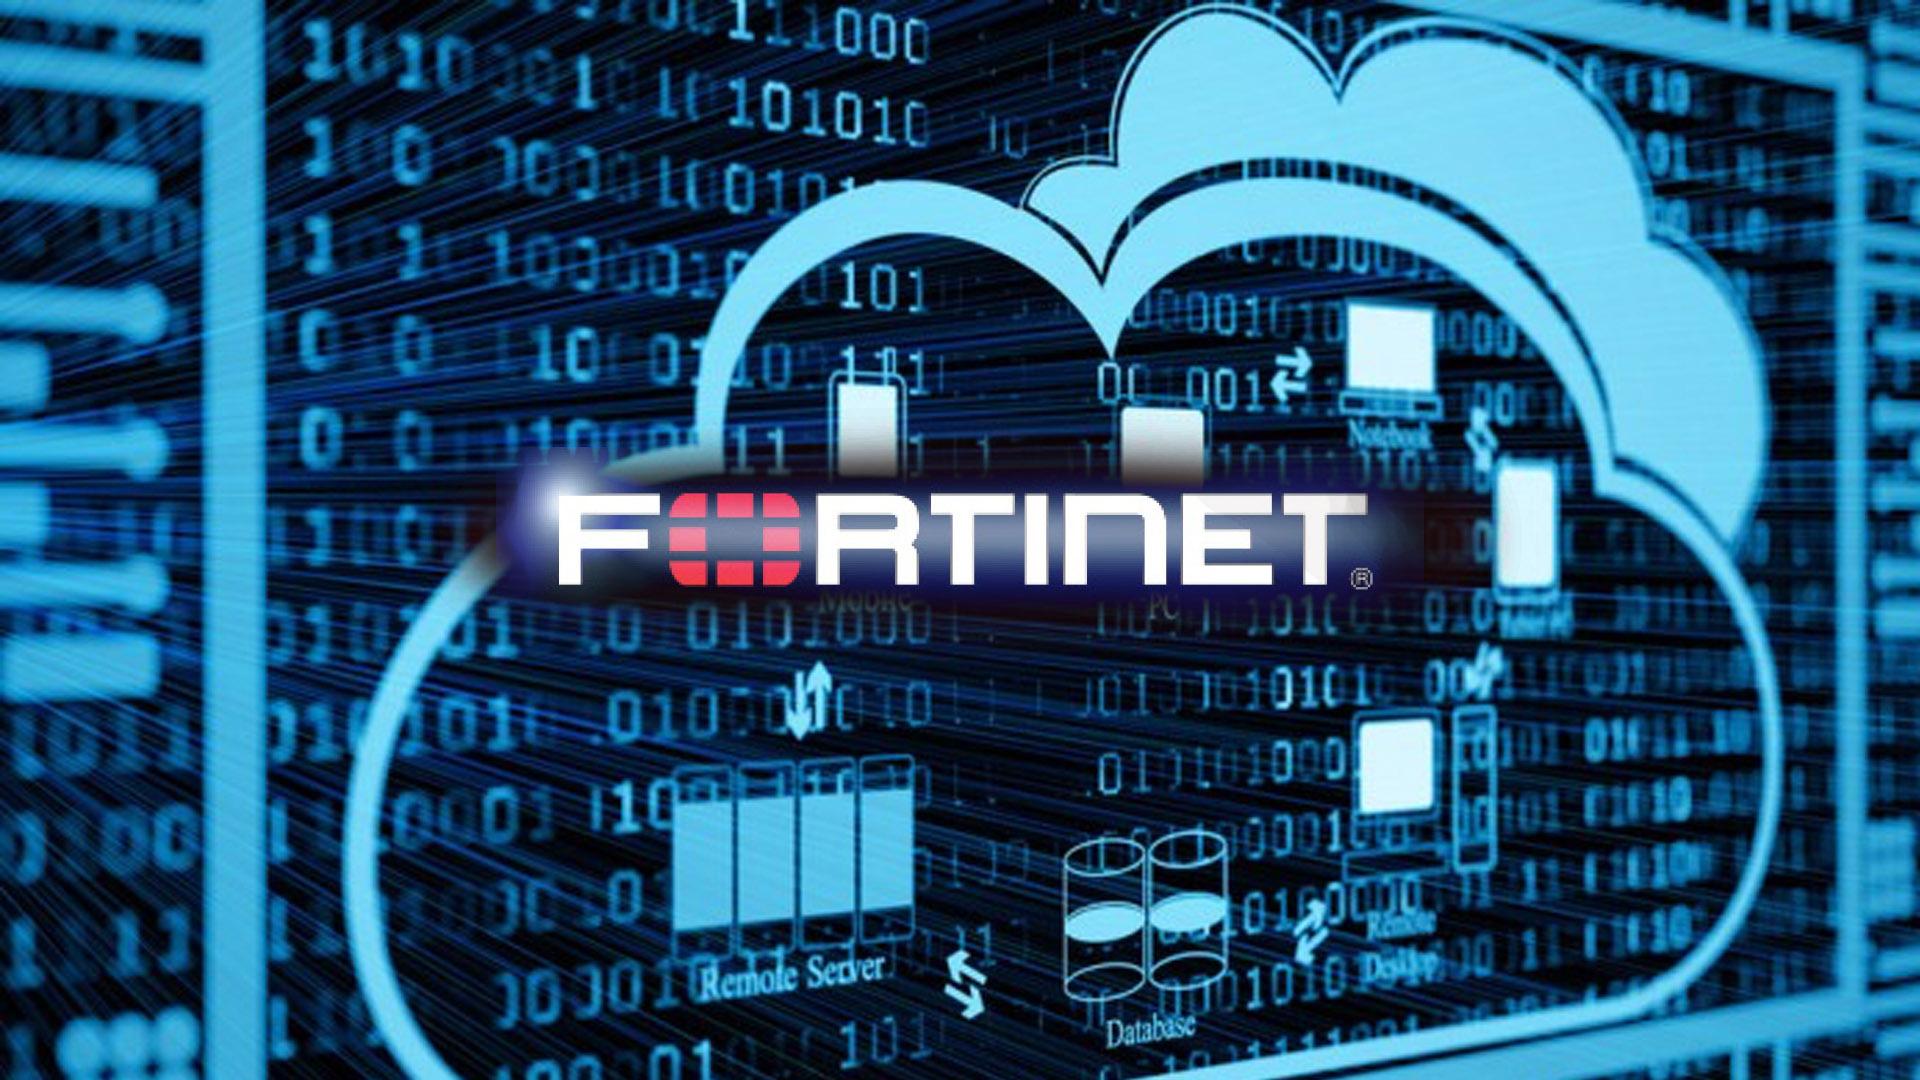 Fortinet Urges Organizations to Review Network Security